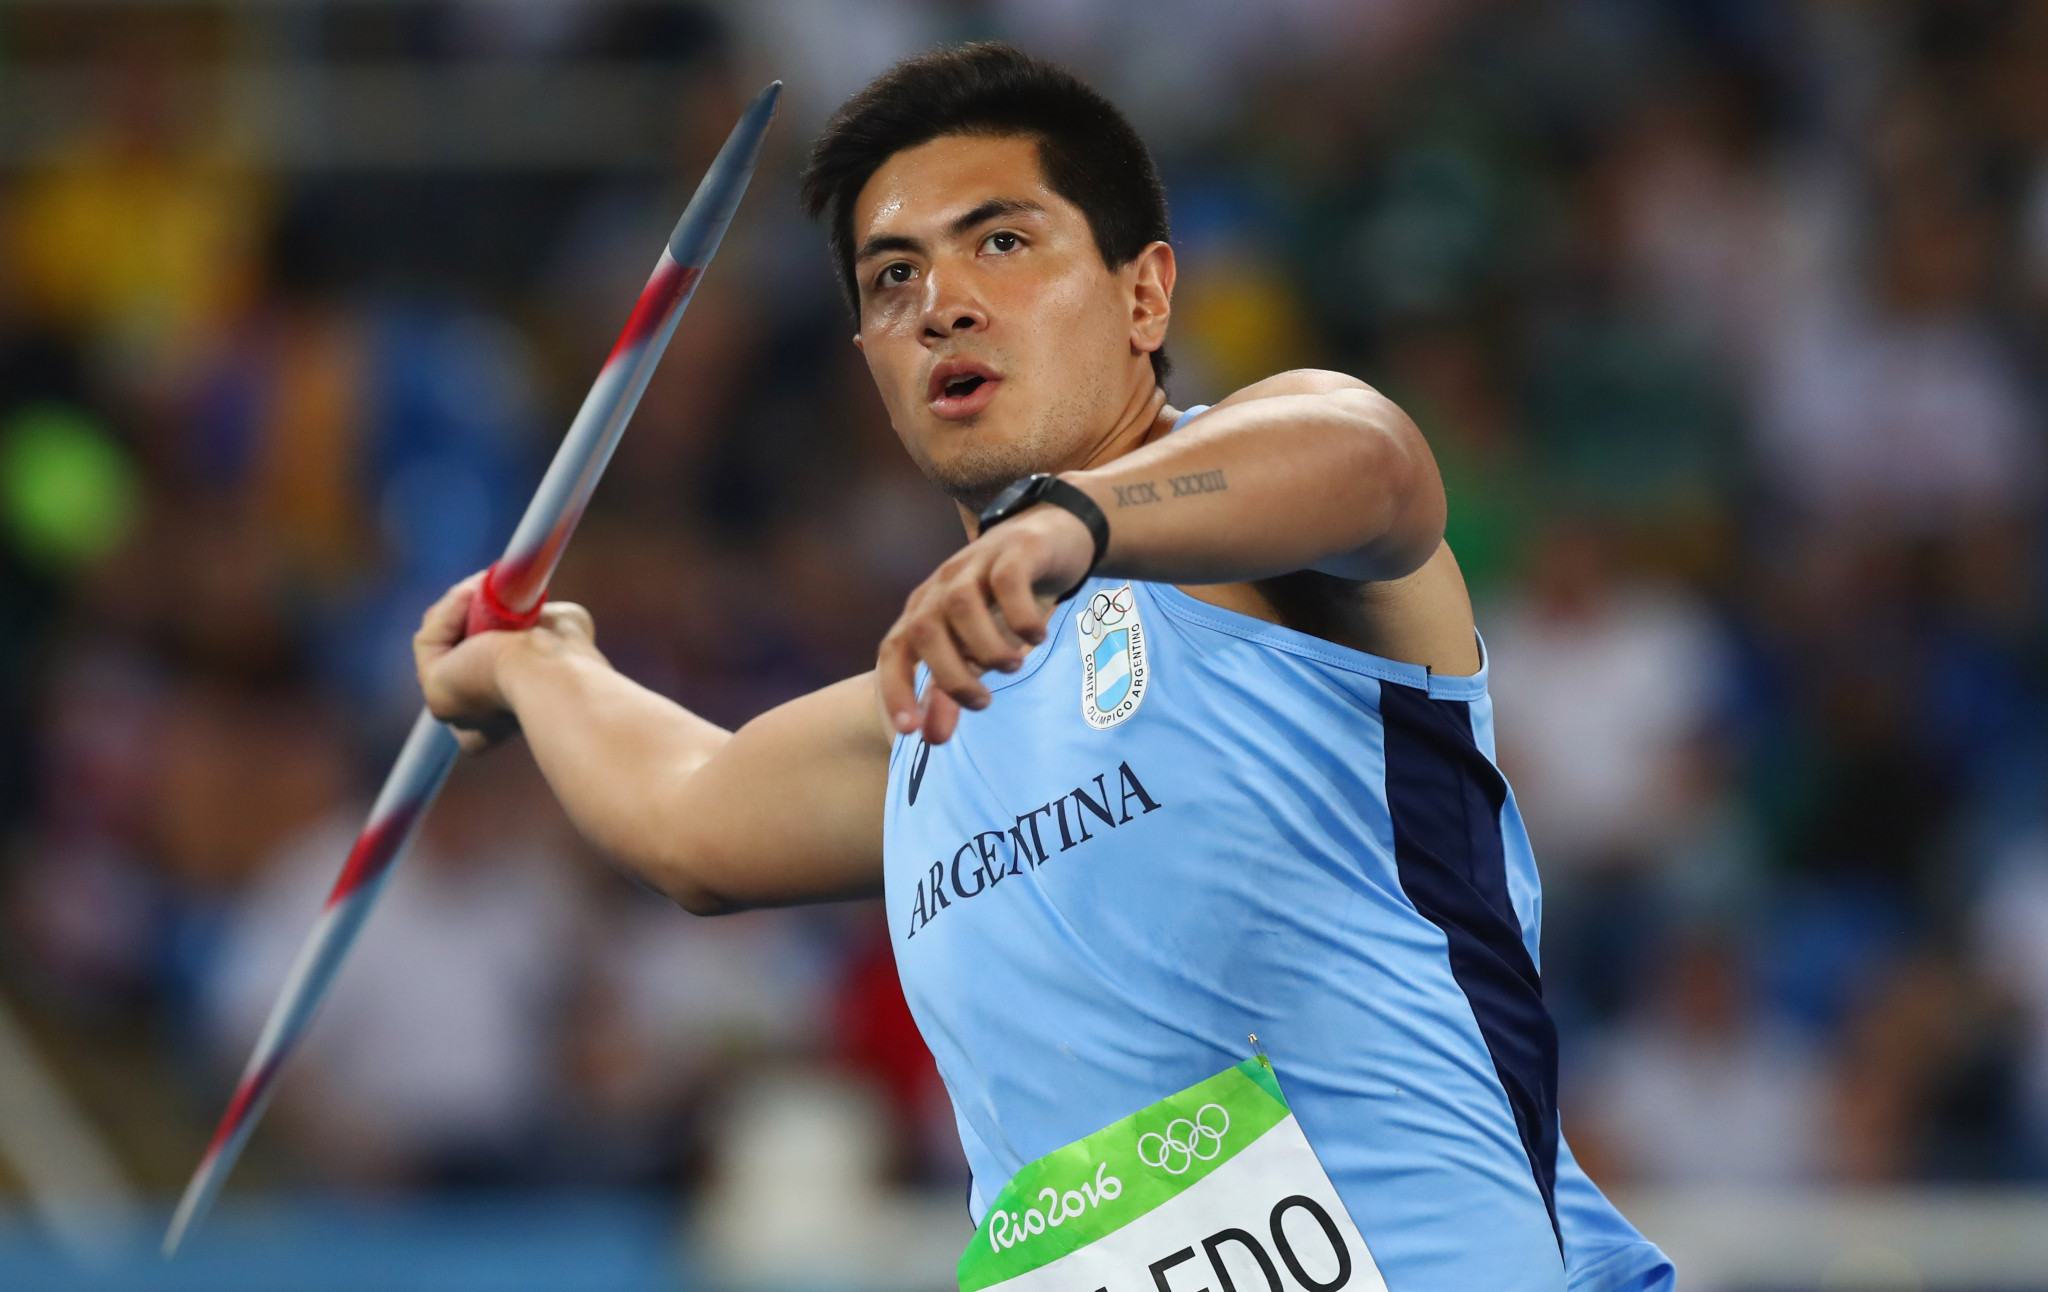 Argentinian javelin thrower Braian Toledo has been killed in a motorcycle crash ©Getty Images